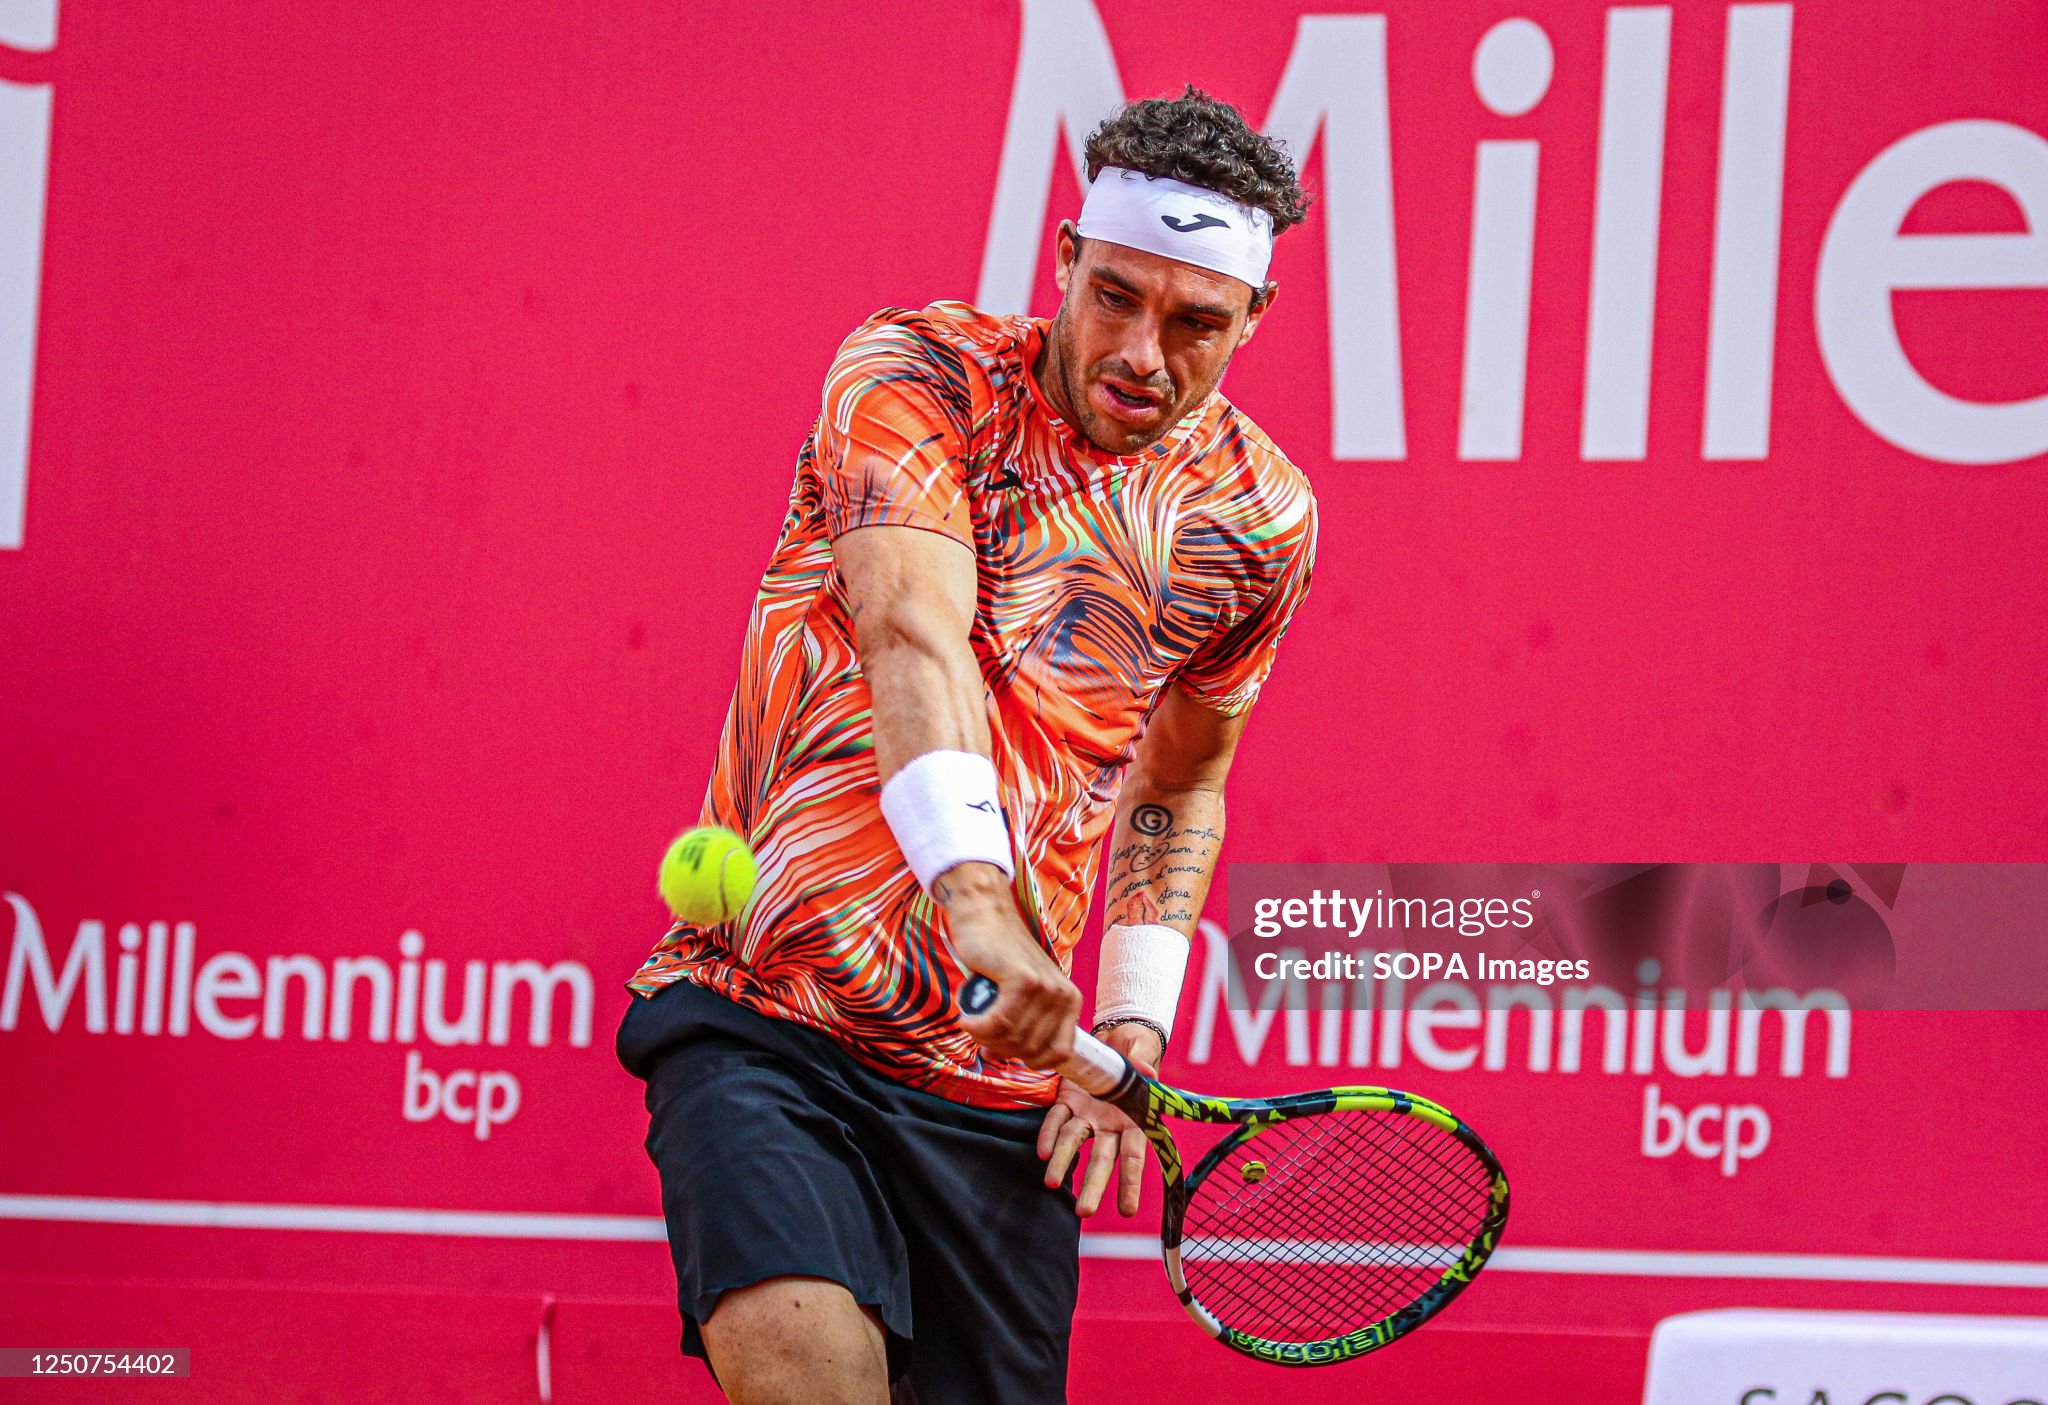 marco-cecchinato-of-italy-plays-against-diego-schwartzman-of.jpg